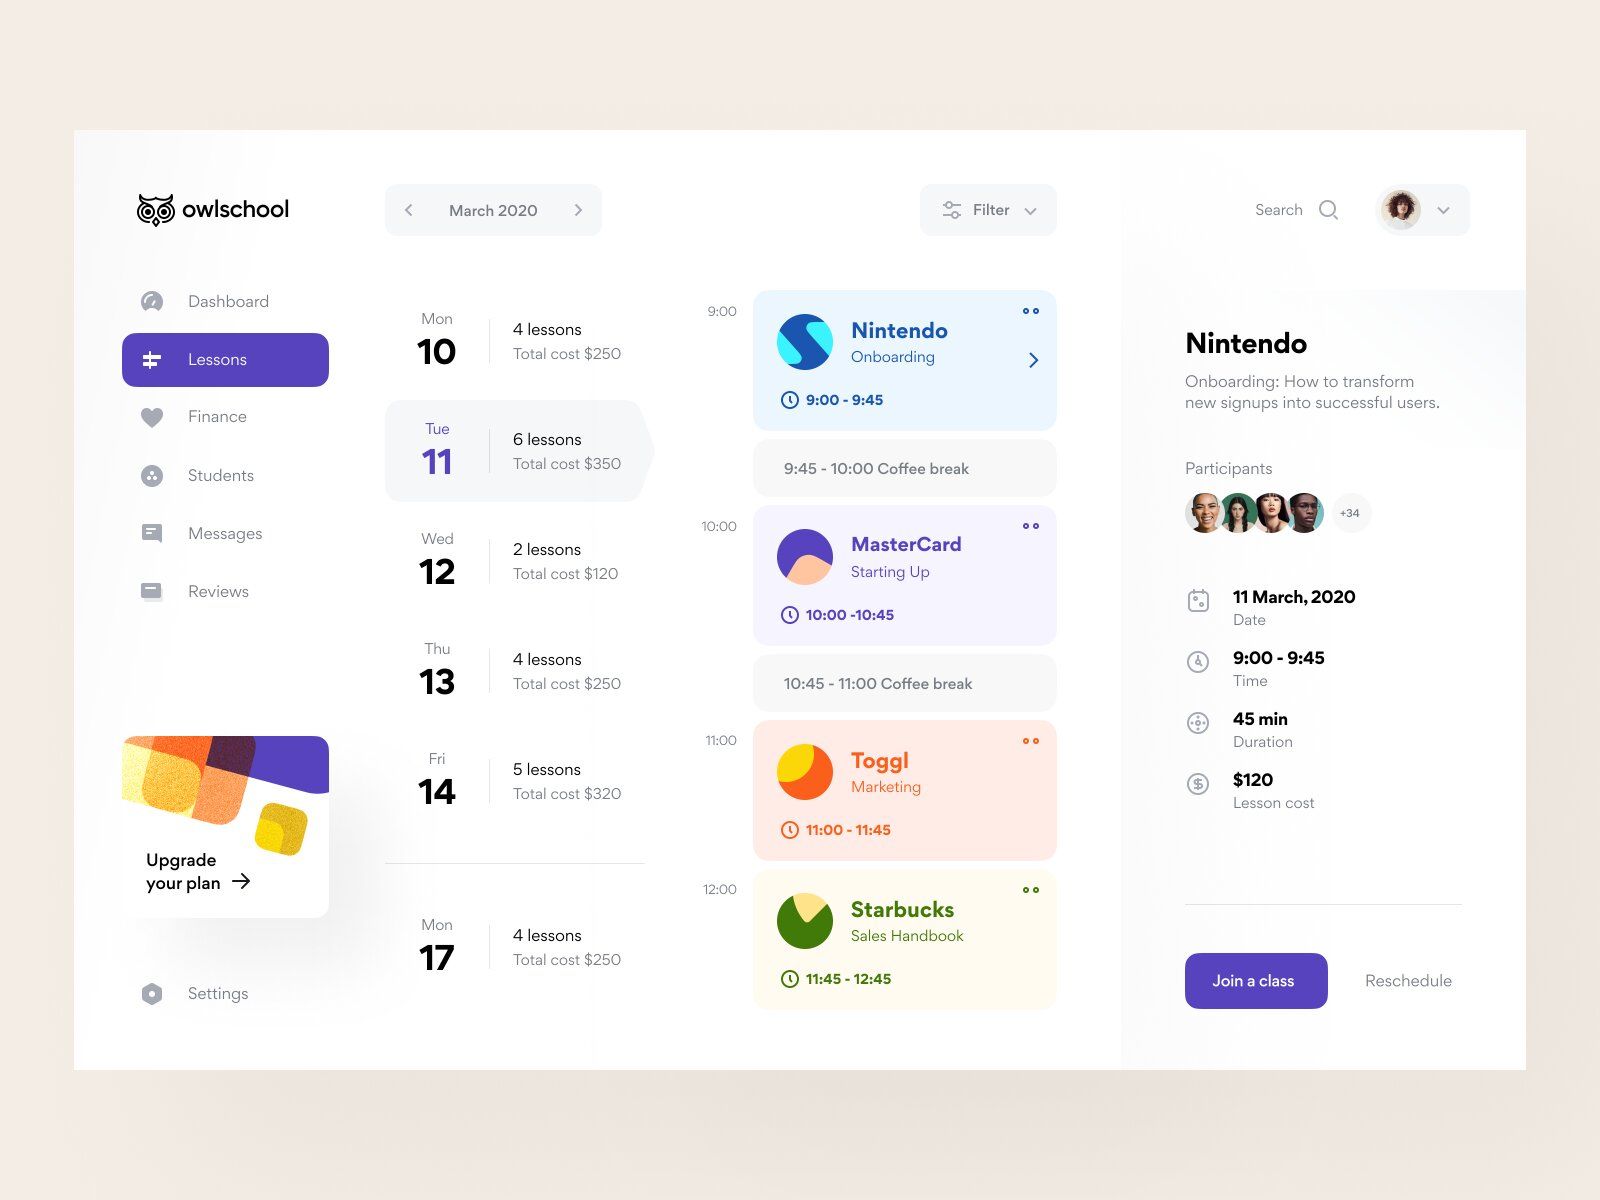 To create an online class consider adding a lesson Screen with a description (*image by [Vladimir Gruev](https://dribbble.com/gruev){ rel="nofollow" .default-md}*)